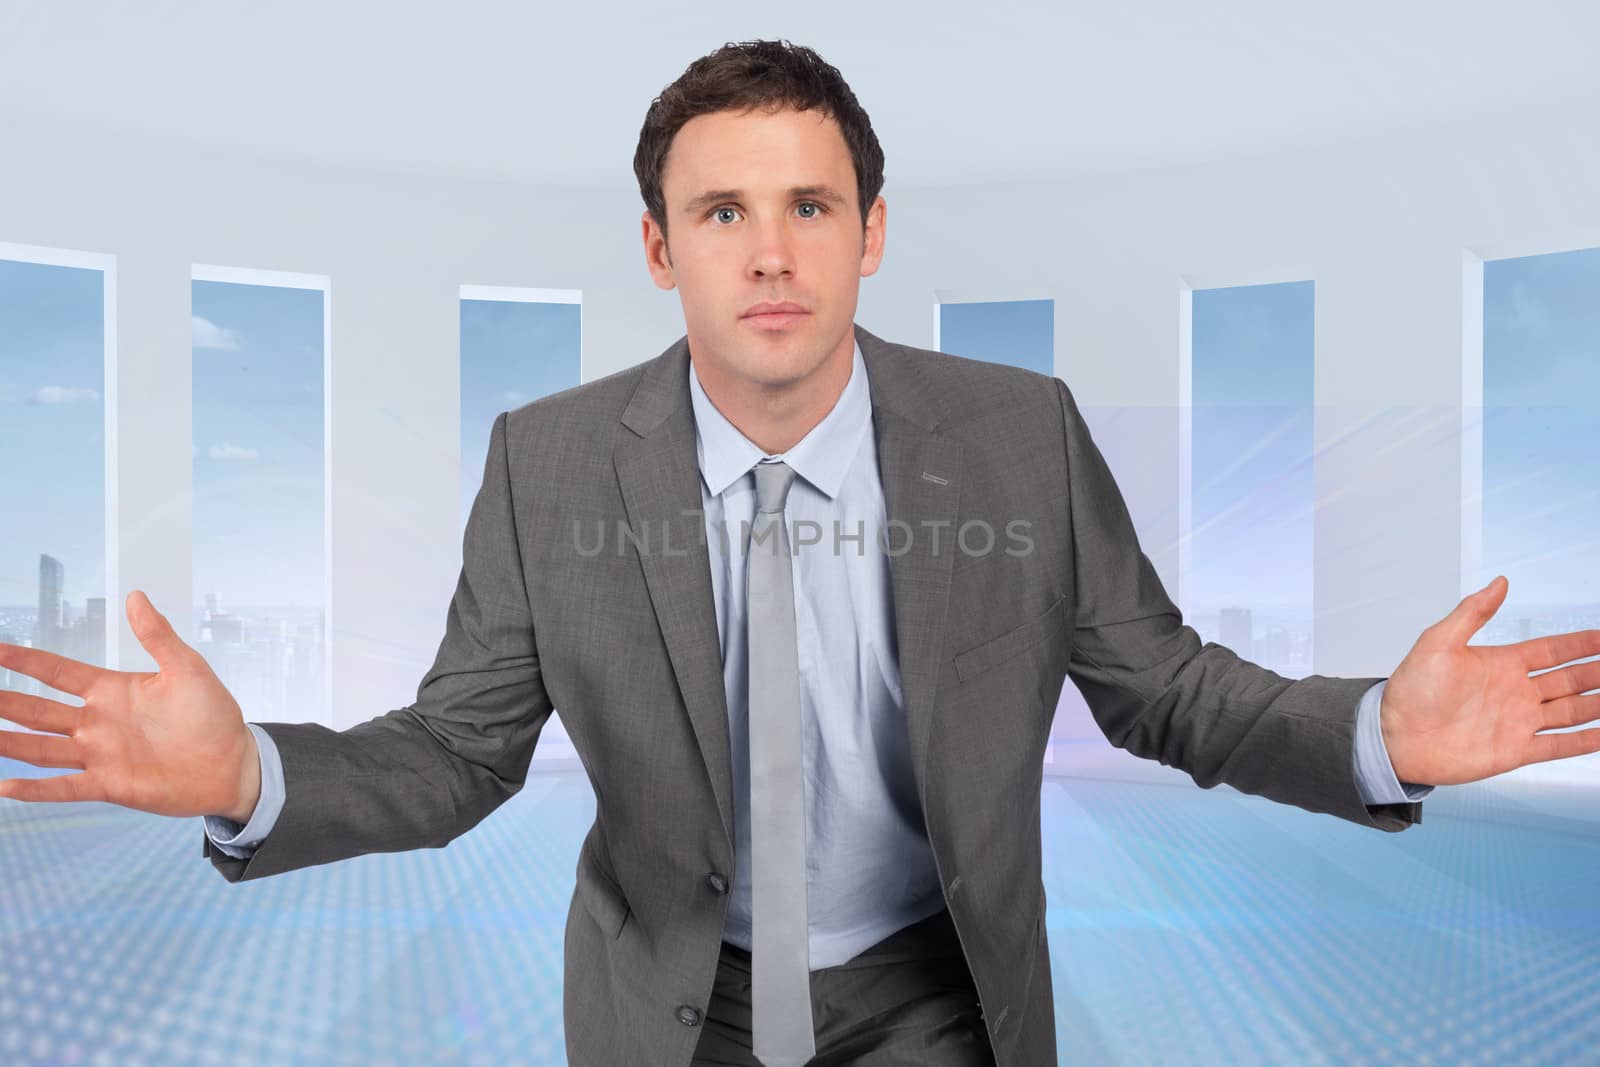 Businessman posing with hands out against abstract design in white room